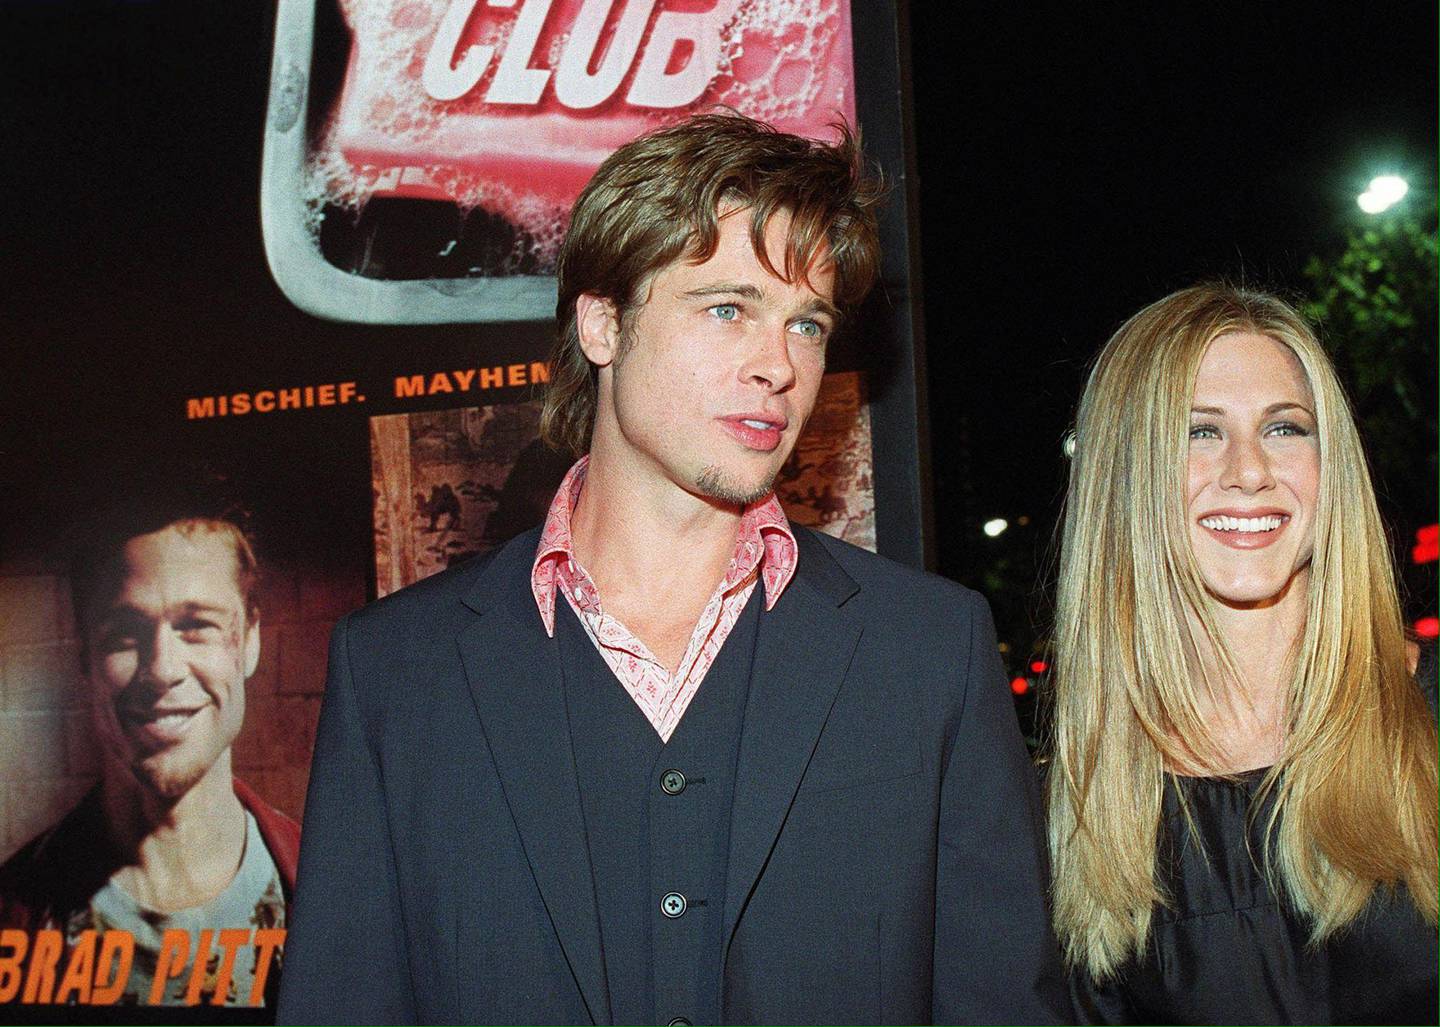 
LAX02 - 19991006 - LOS ANGELES, CA, UNITED STATES : US actor Brad Pitt(L) arrives at the premiere of his new film "Fight Club" with partner Jenifer Aniston(R) in Los Angeles 06 October 1999.  The film also stars Edward Norton and Helena Bonham Carter.    
EPA PHOTO AFP/LUCY NICHOLSON/ln/ch/vg